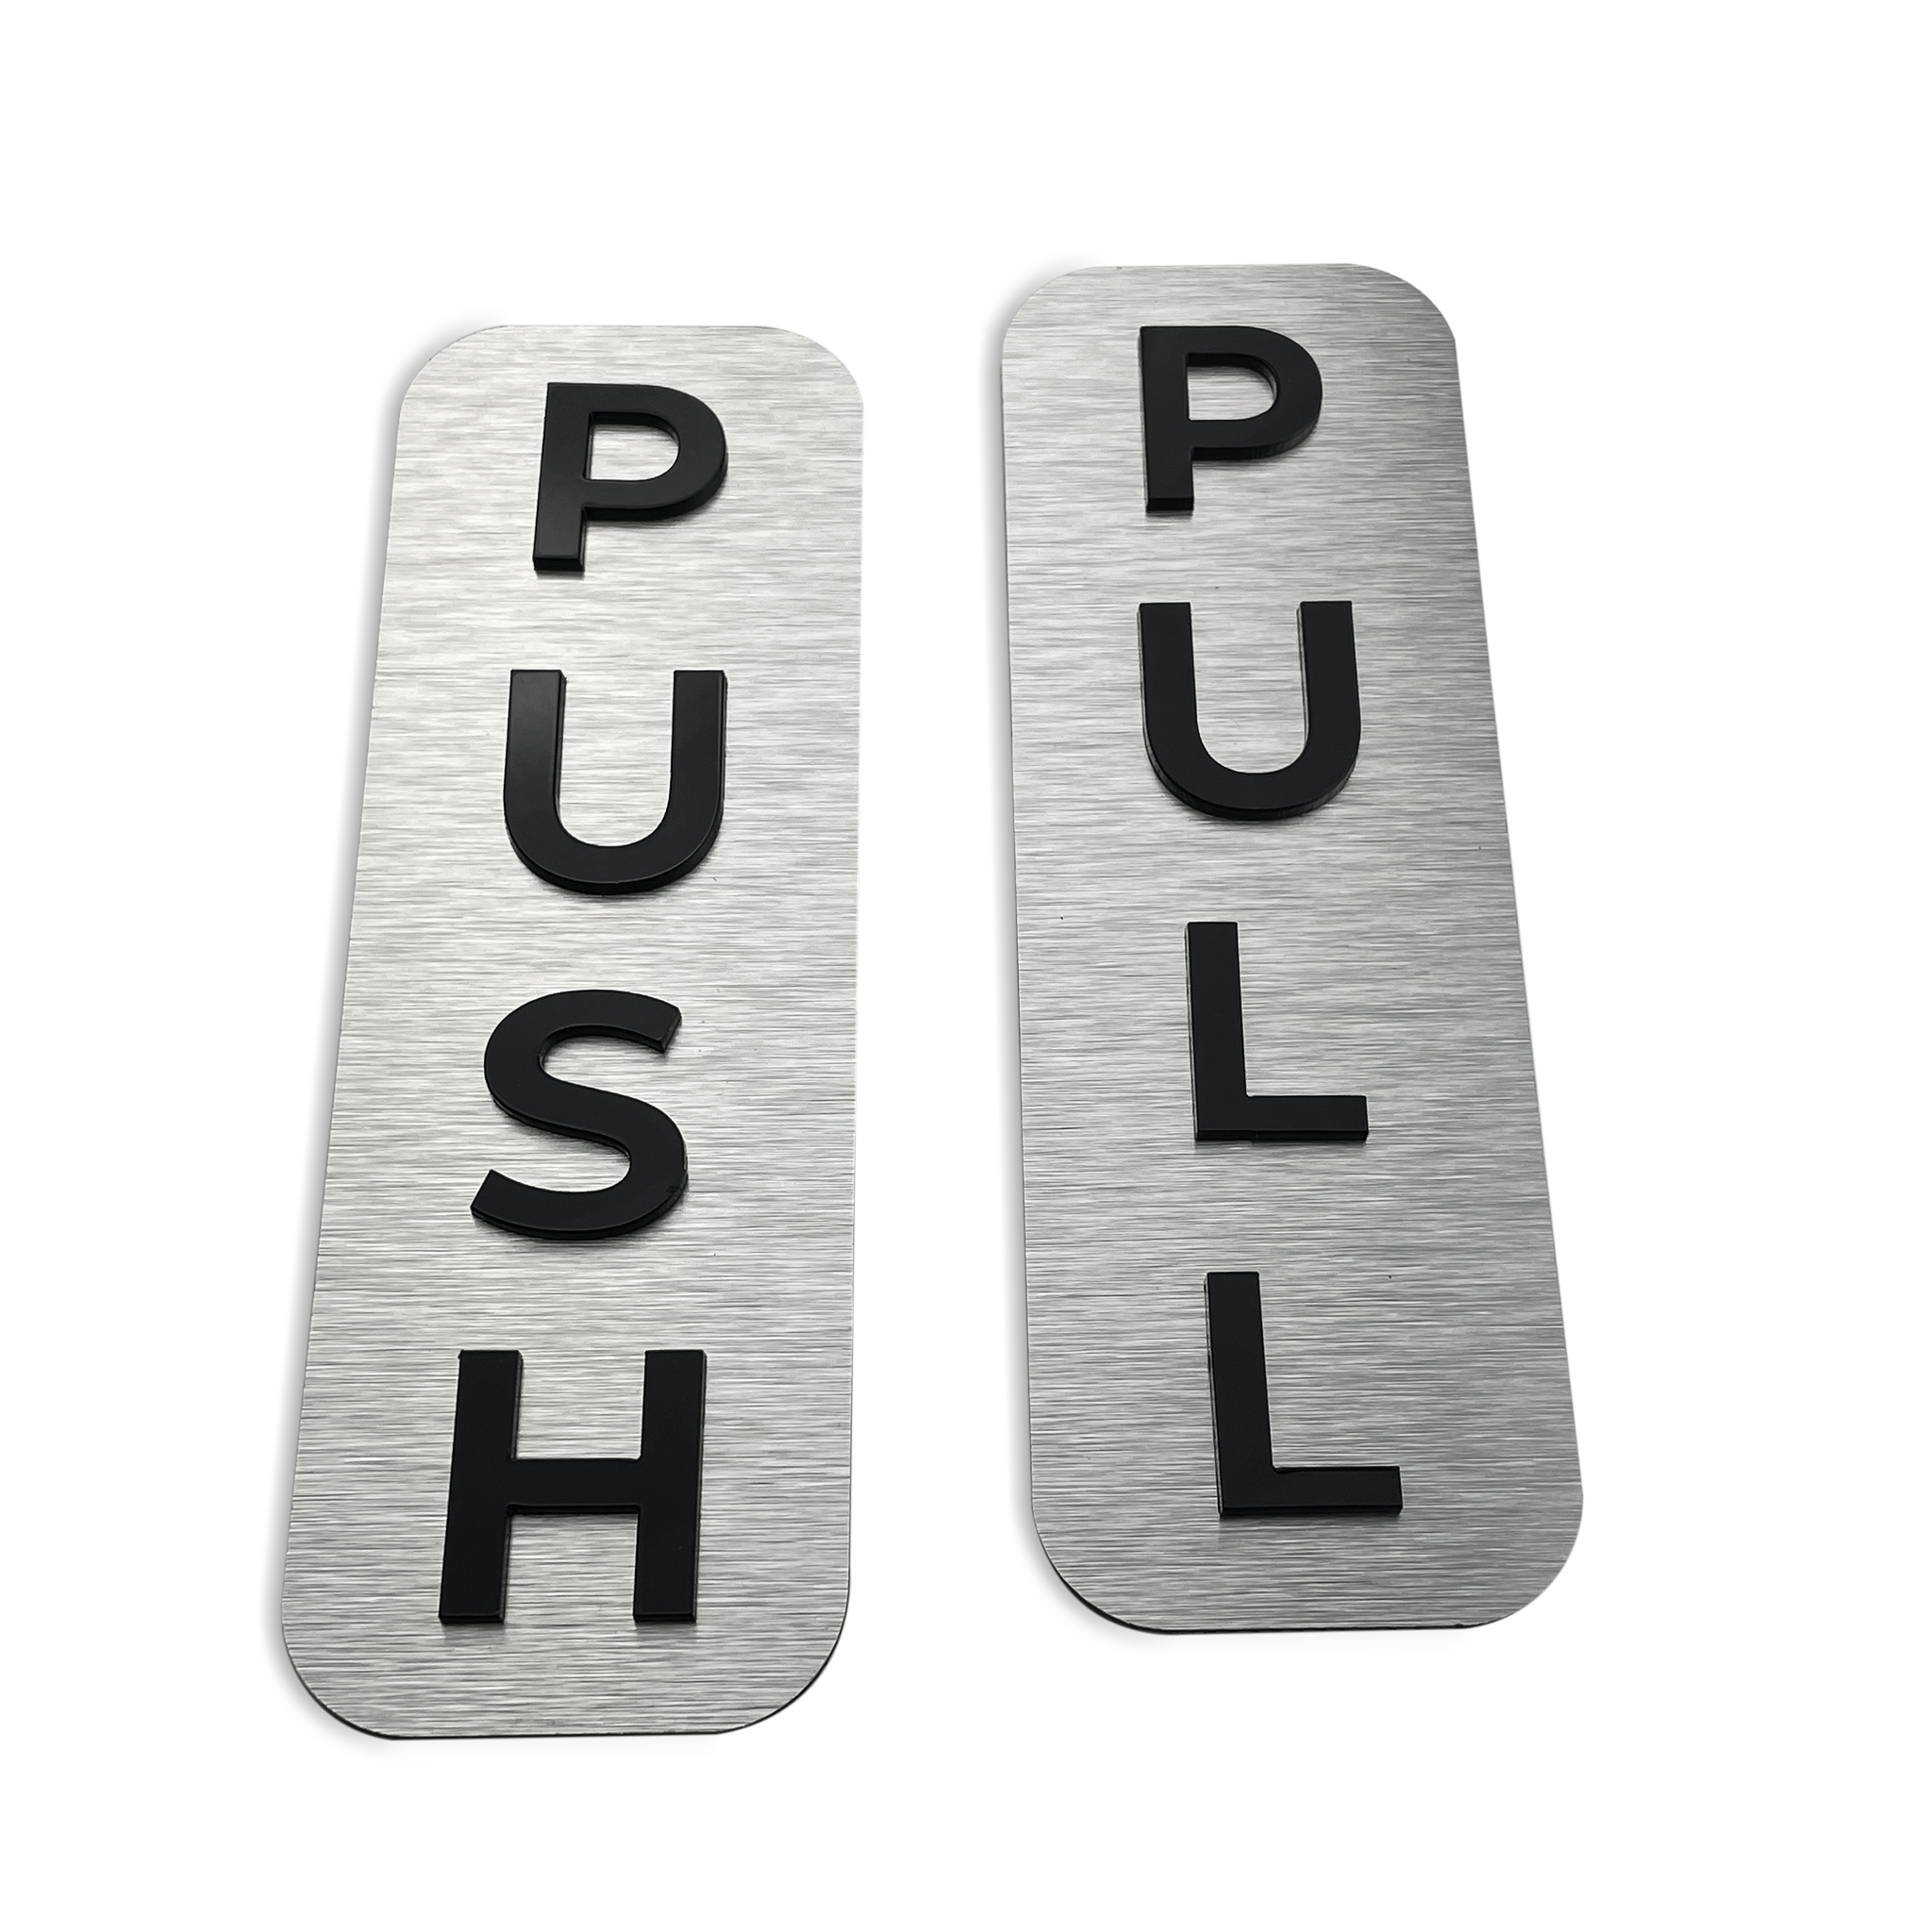 PUSH AND PULL SIGNAGE - ALUMA Door Signs - Custom Door Signs For Business & Office